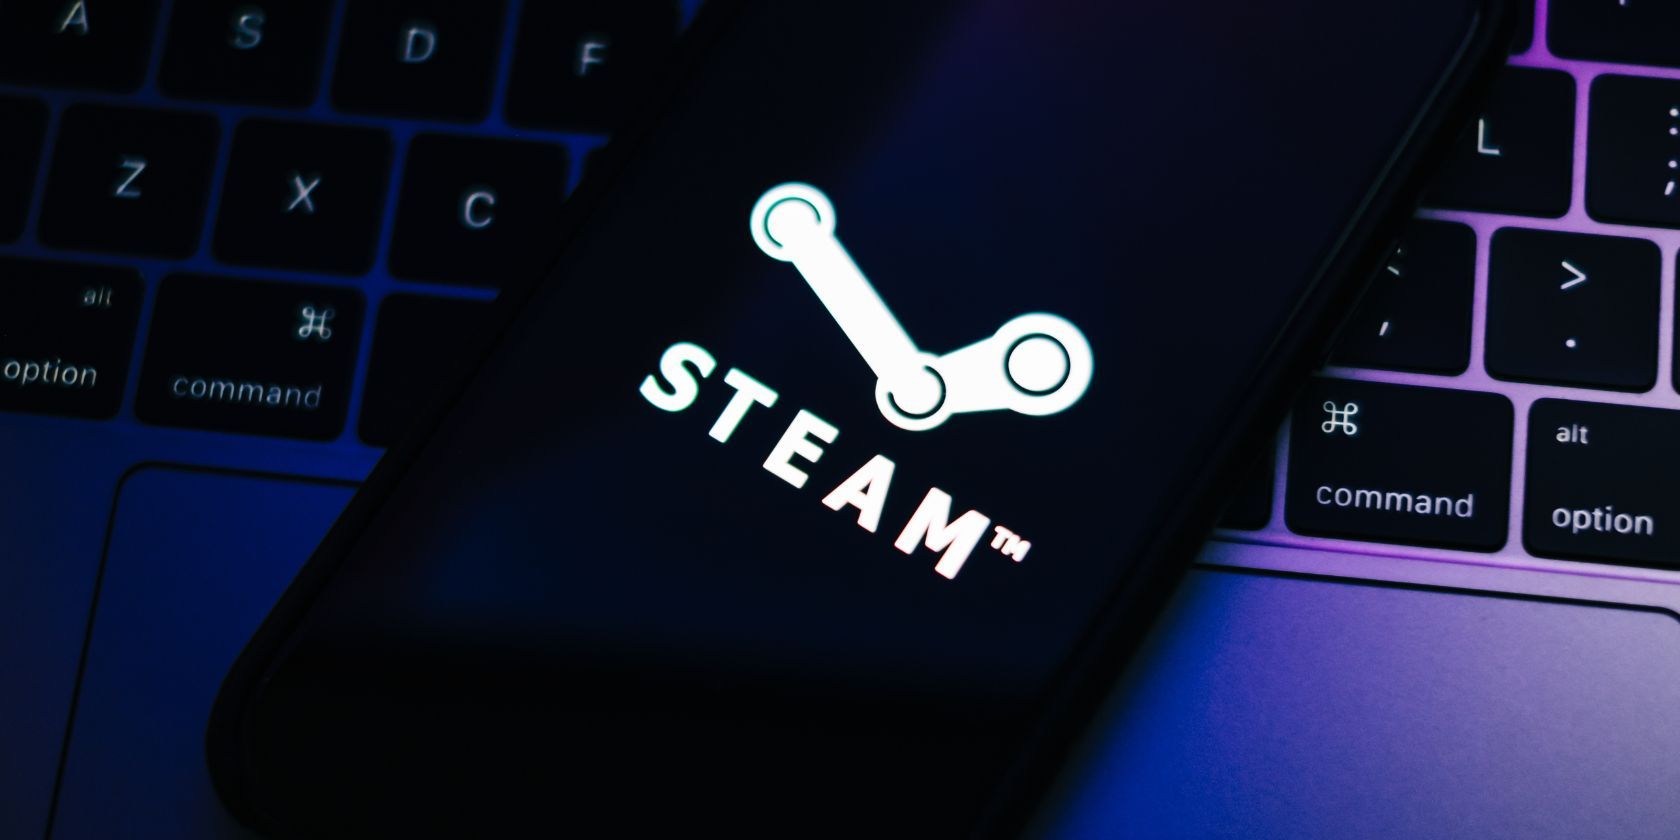 steam app on a smartphone